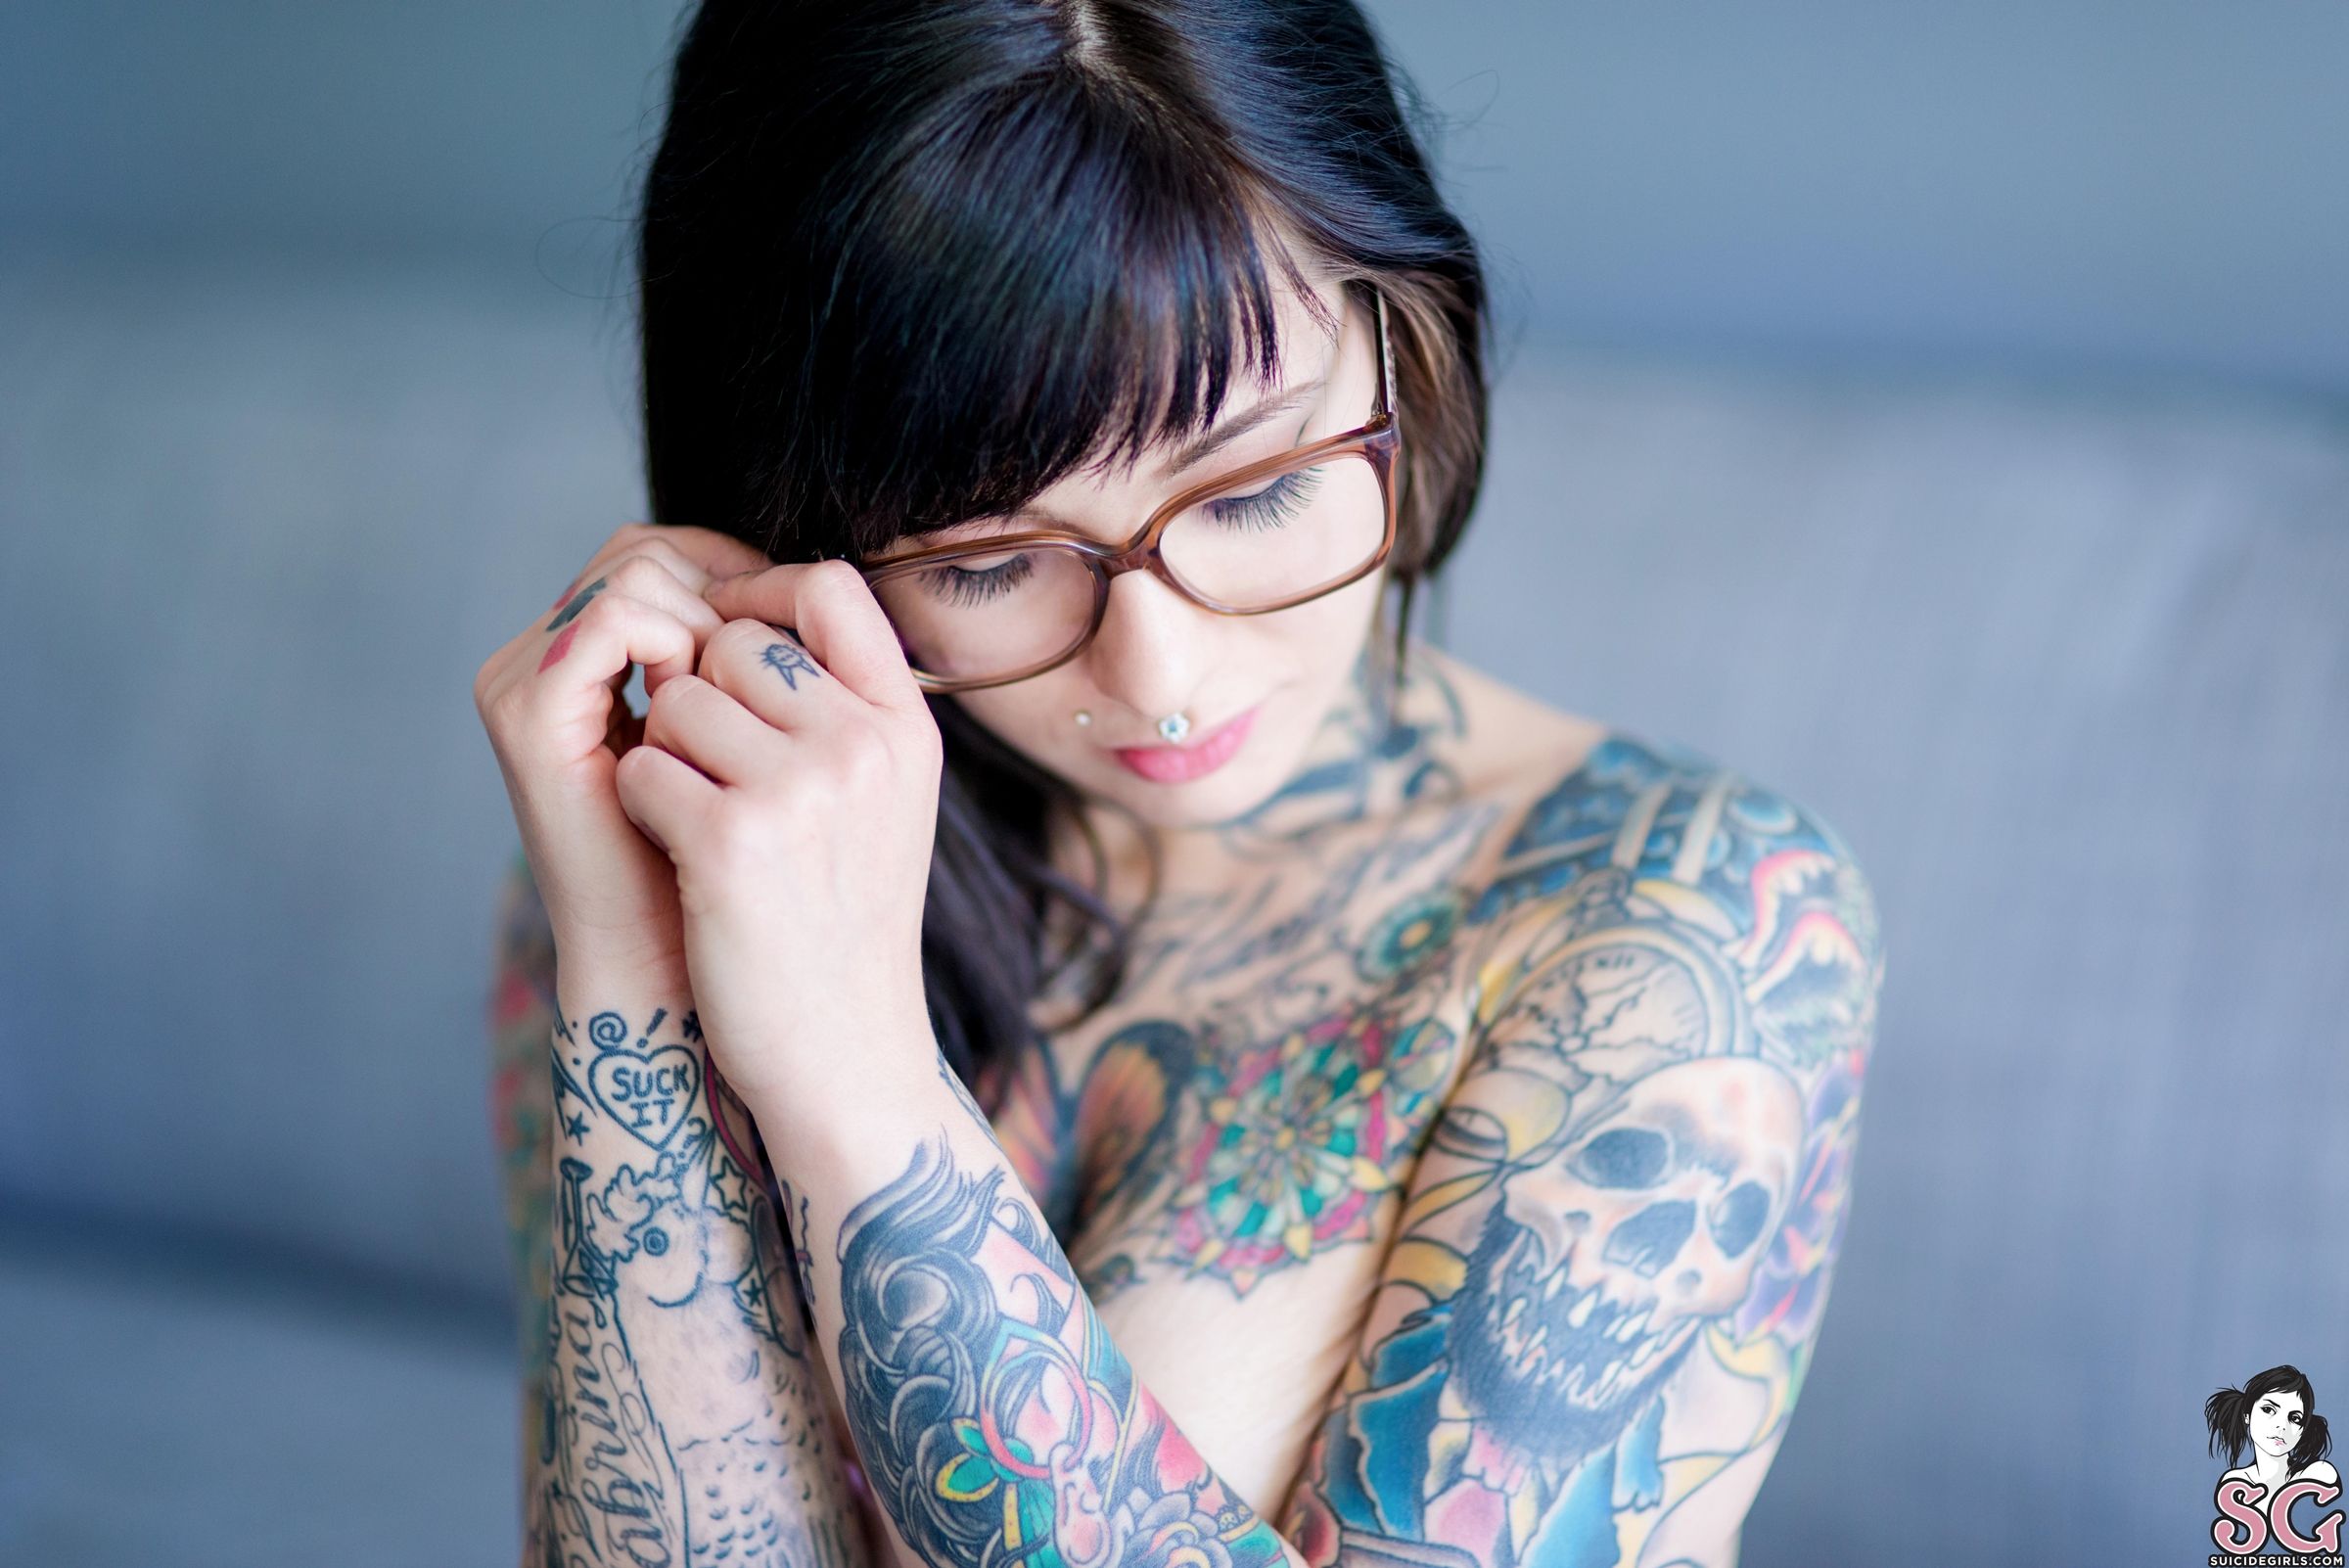 Beautiful Suicide Girl Exning Elegy To The Void (44) Amazing High resolutio...